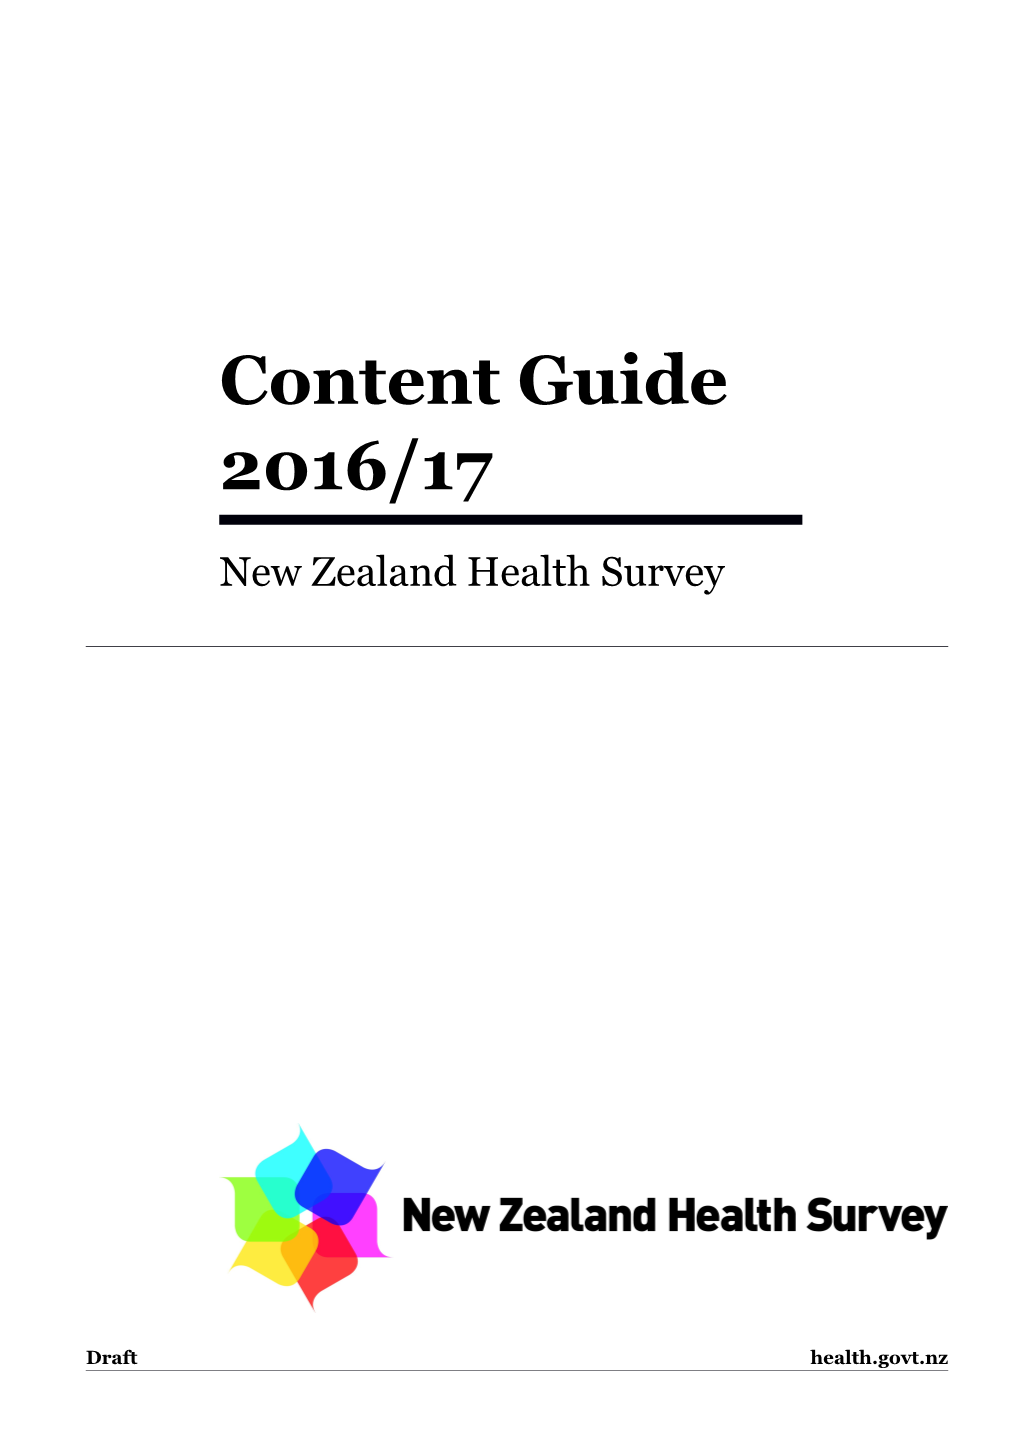 Content Guide 2016/17: New Zealand Health Survey